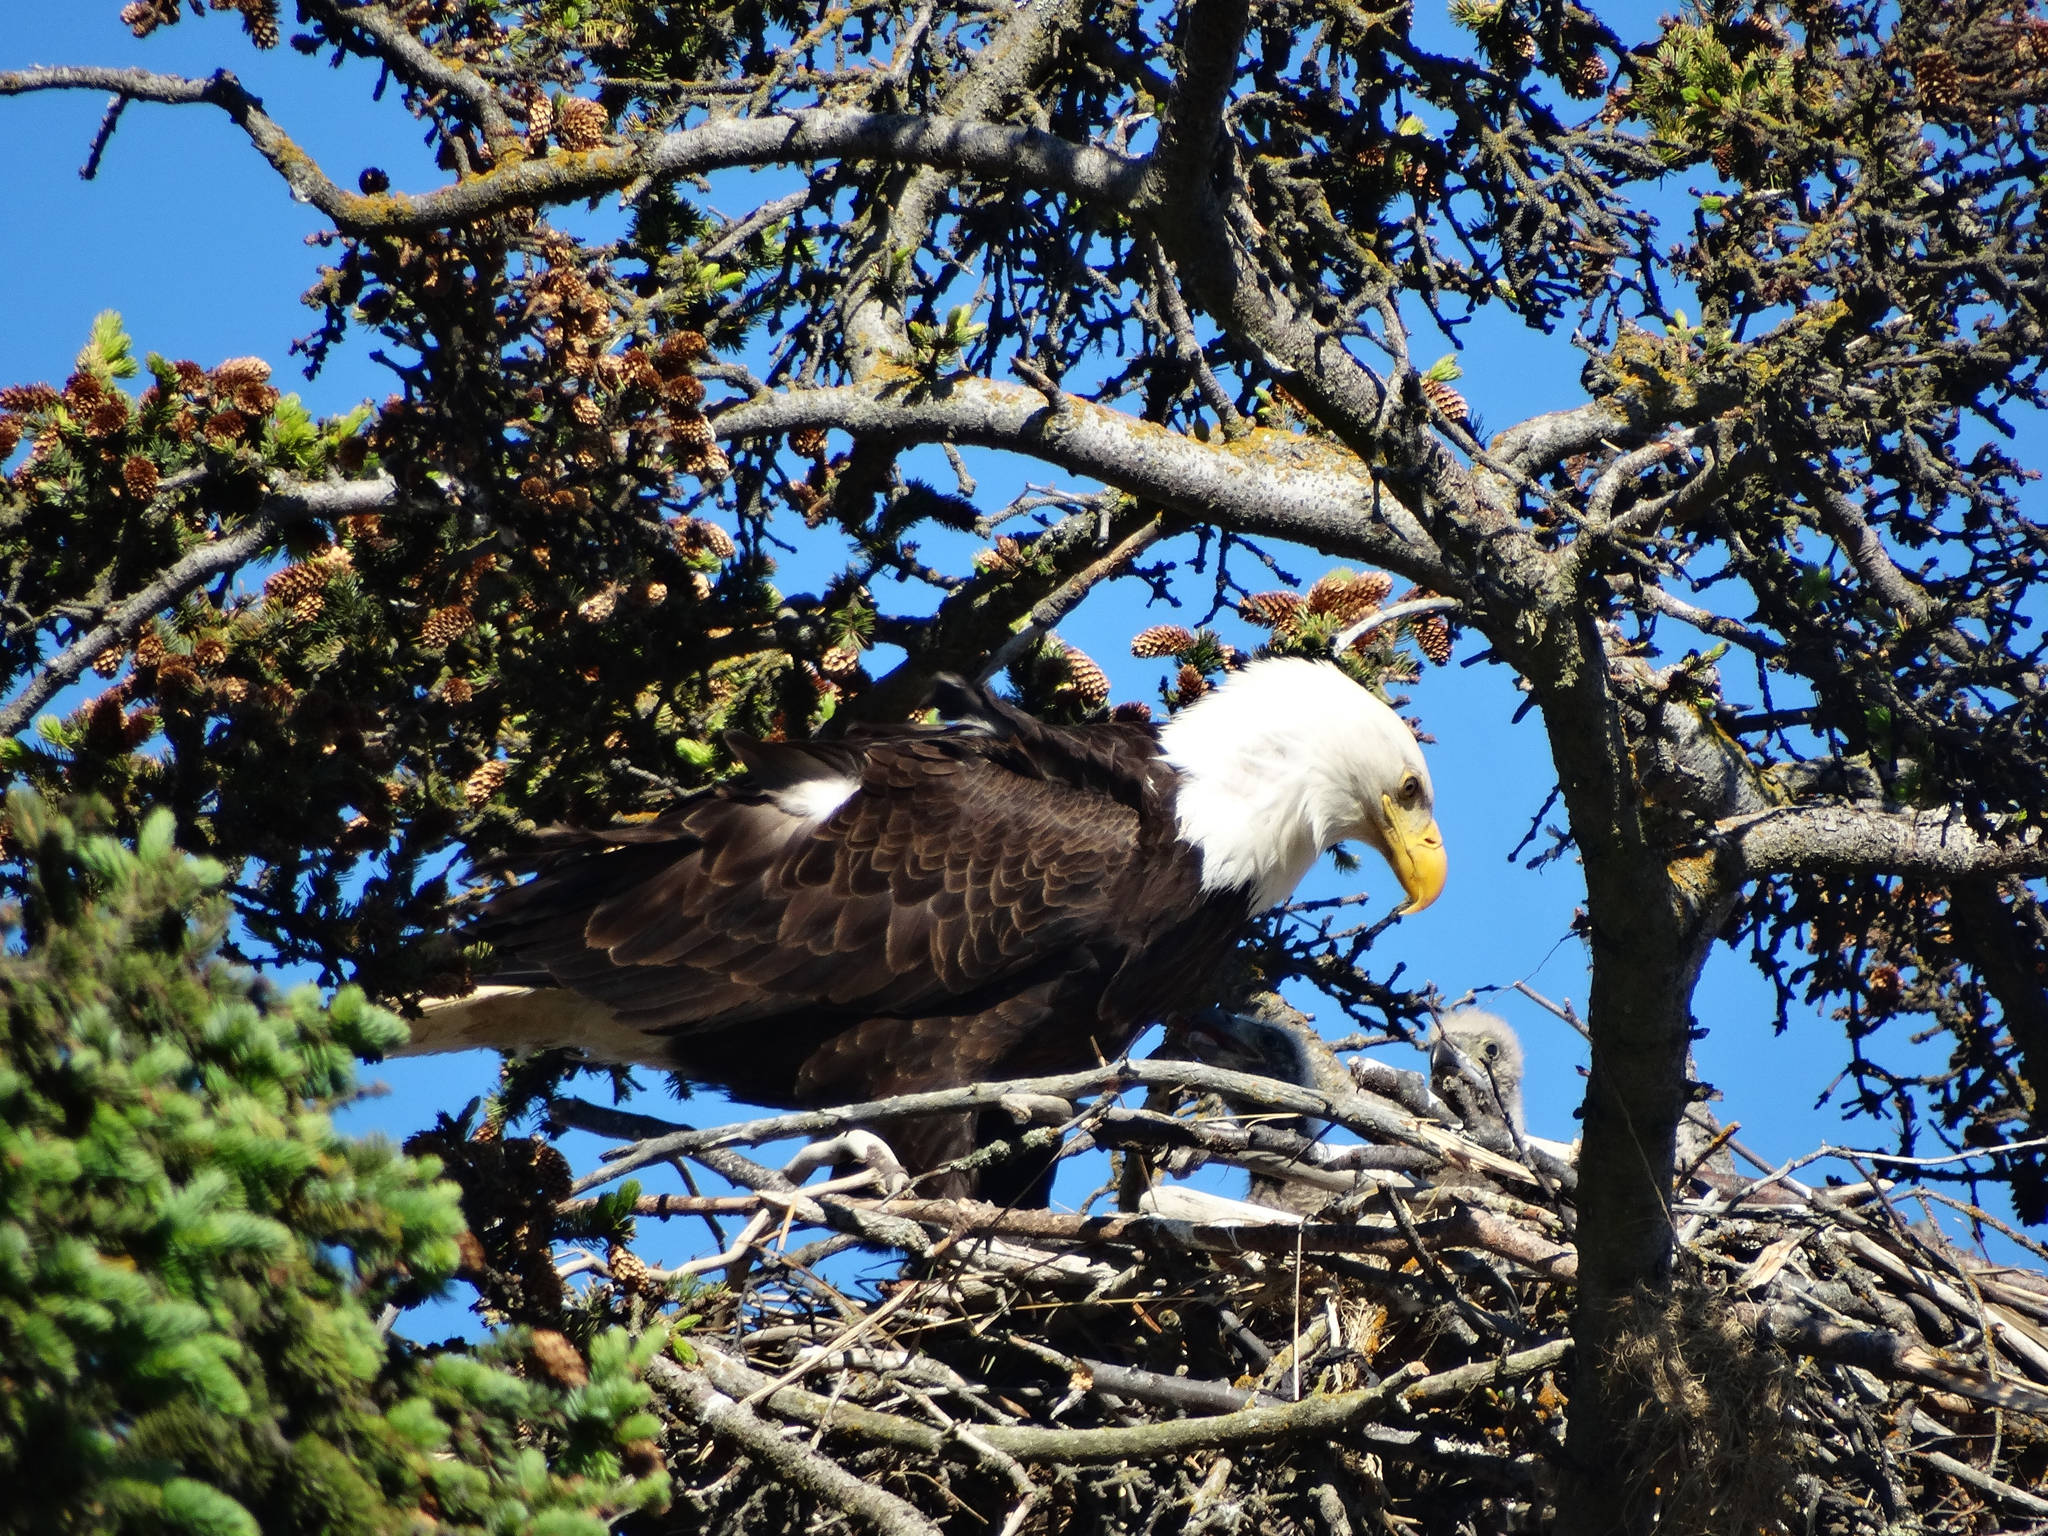 A bald eagle feeds a chick at the nest by the Homer motorhome dump on June 24. Since 2010, a pair of bald eagles has nested in the area near Beluga Slough south of the Lake Street and Sterling Highway intersection. The first nest was destroyed when the tree fell down in a winter storm. In 2012 the eagles built a new nest across from the Homer Post Office by the motorhome dump station. In 2014 they built another nest in a new tree closer to the slough. In 2016 they built another nest, but in 2017 moved back to the post office location.